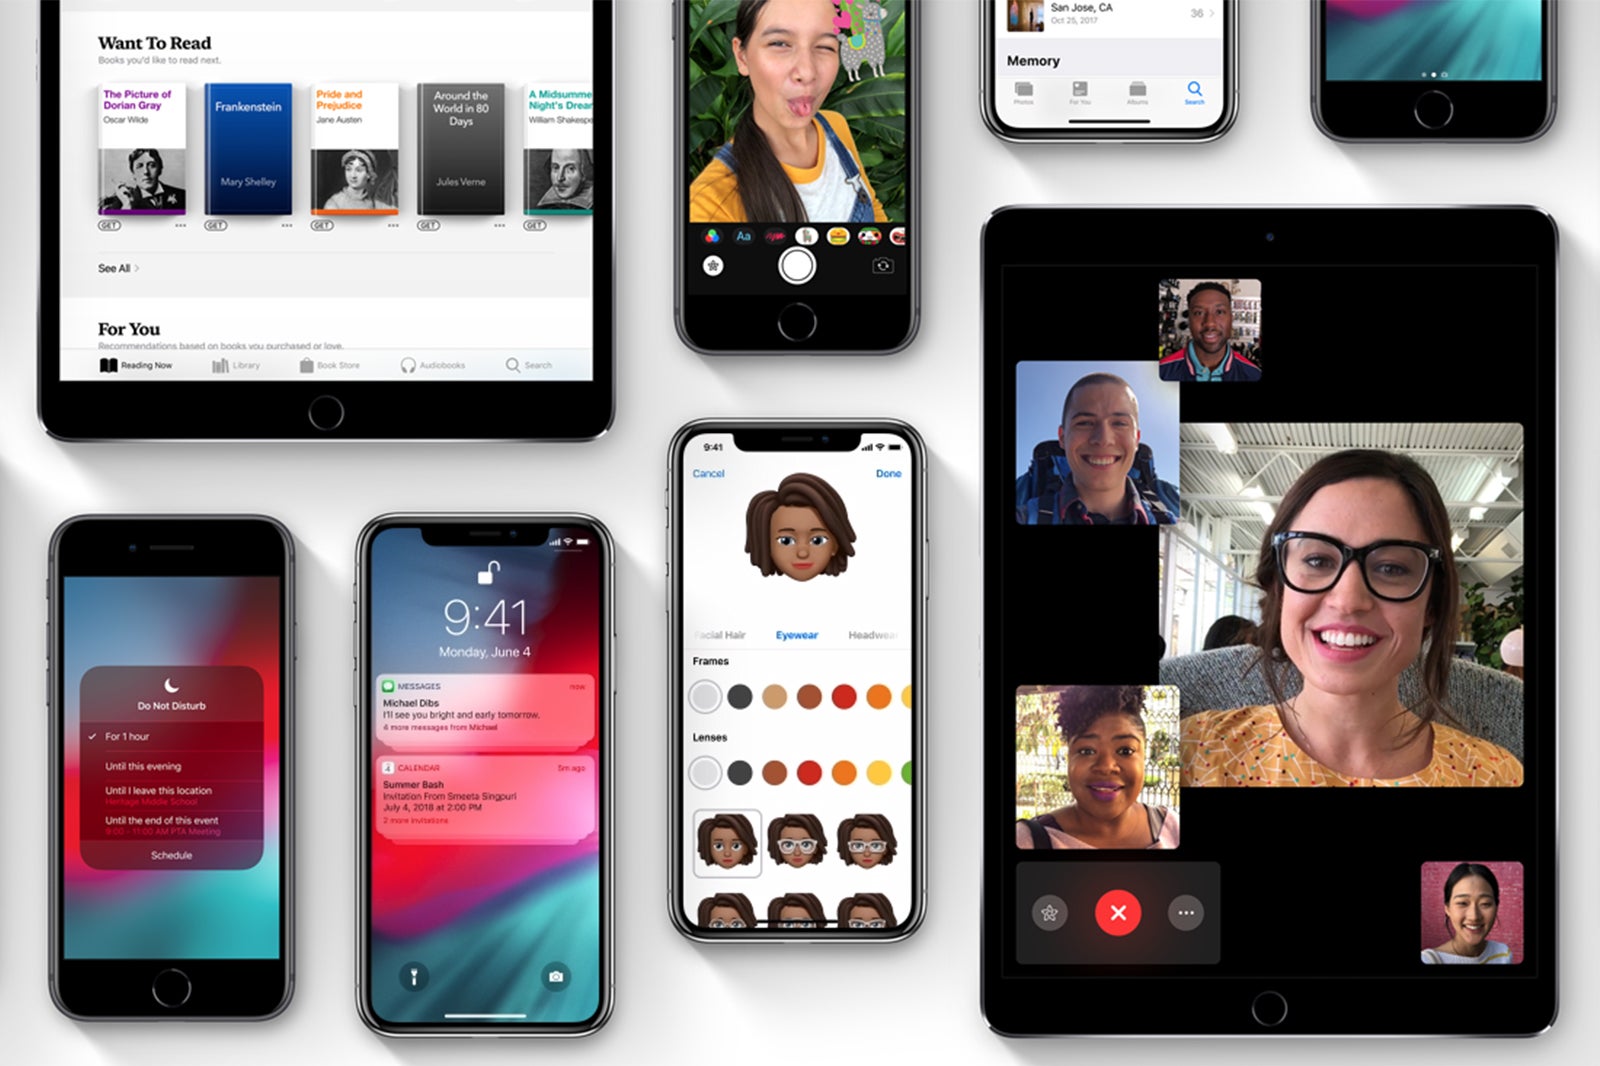 Download iOS 12 public beta on your iPhone, and downgrade if needed -  PhoneArena